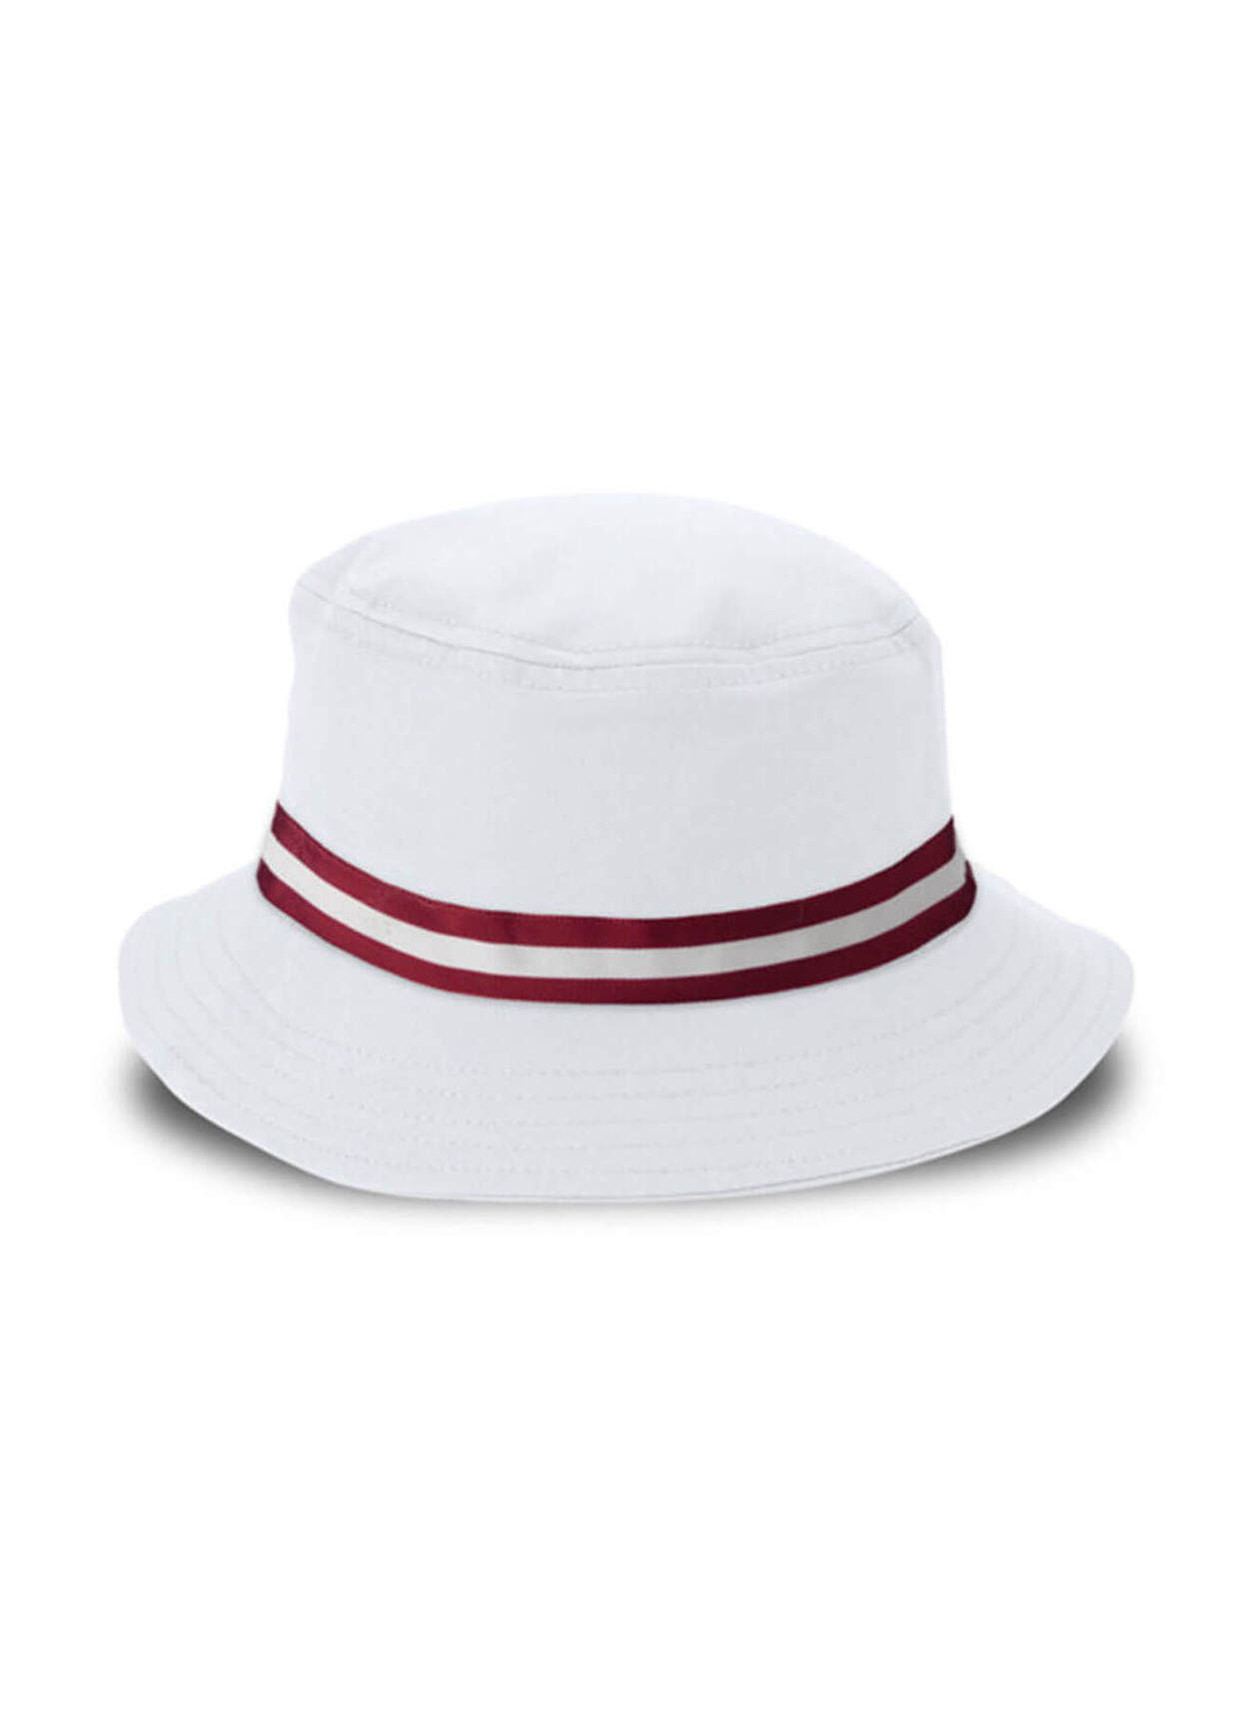 Imperial White / Maroon The Oxford Bucket Hat